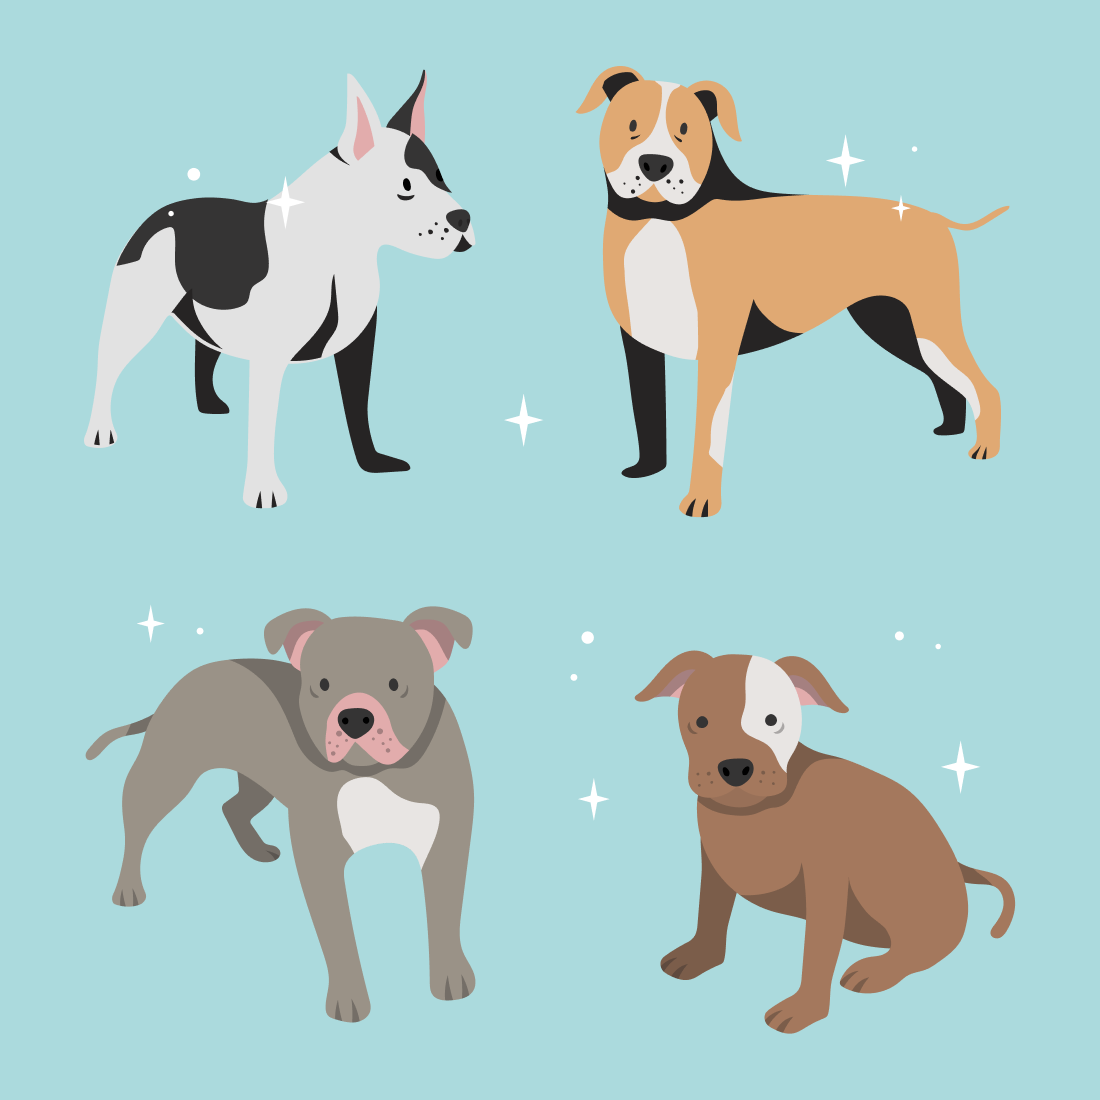 Four dogs are standing in a row on a blue background.